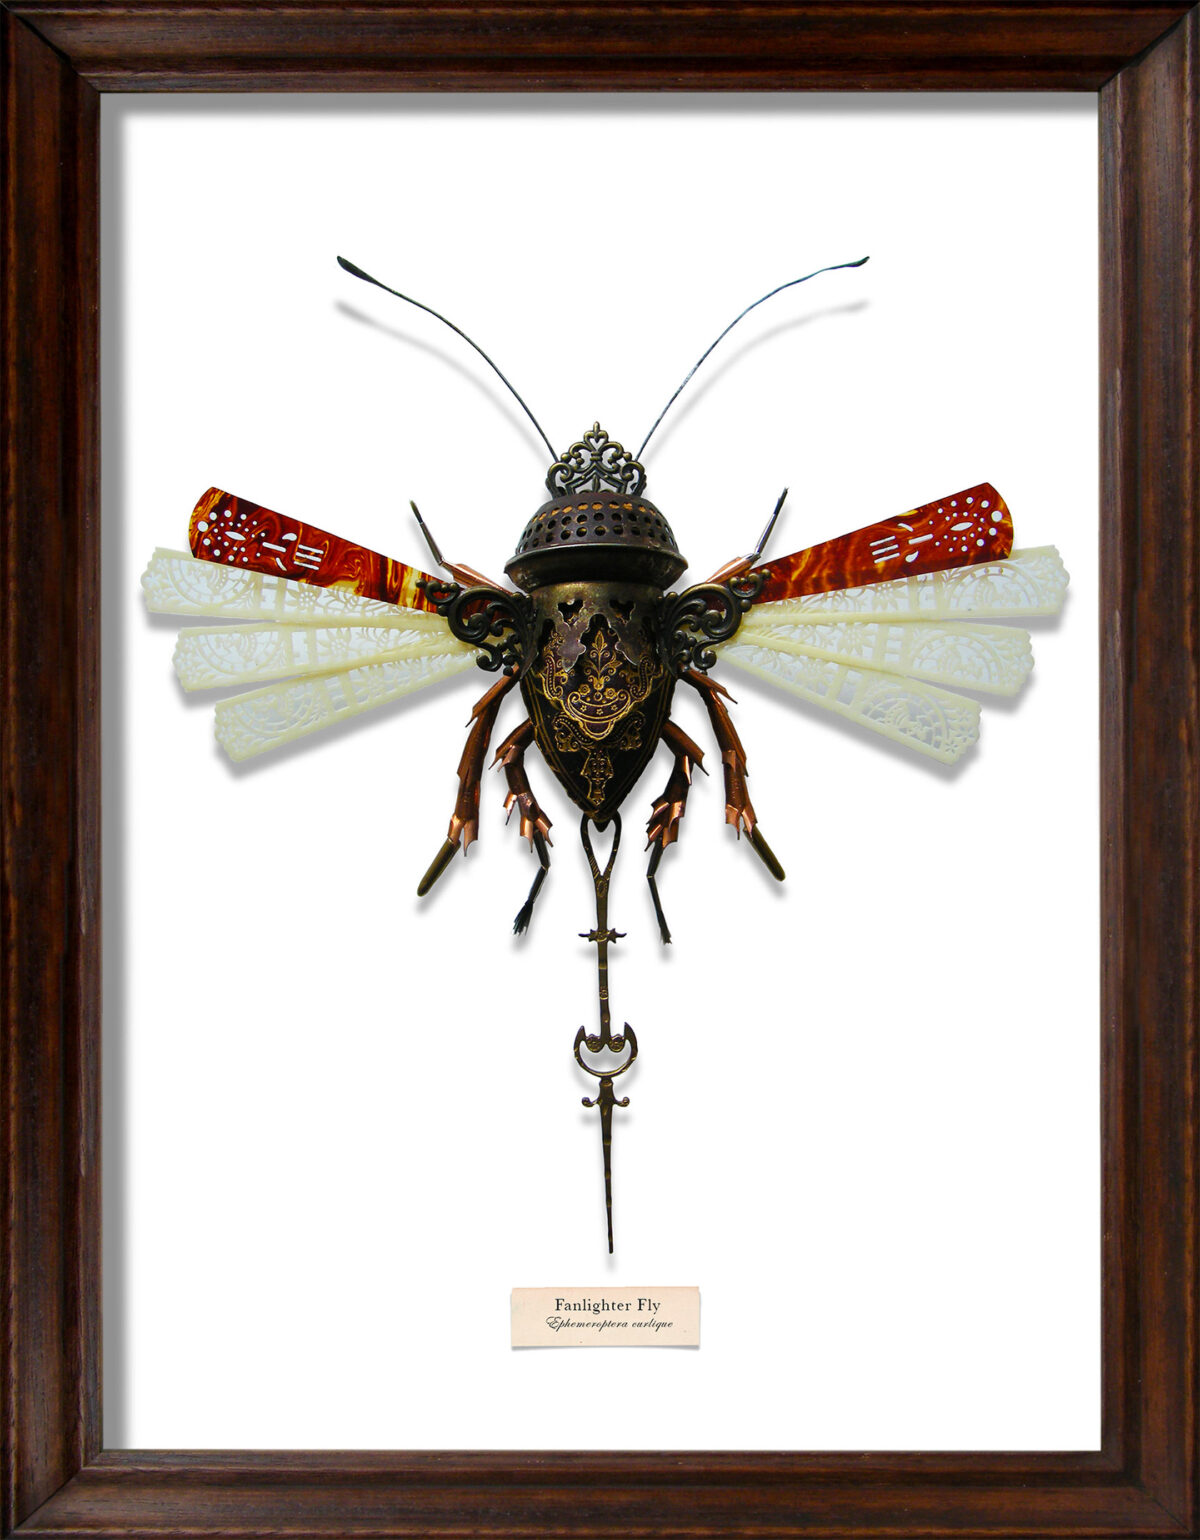 Litter Bugs Incredible Insect Found Object Sculptures By Mark Oliver (13)